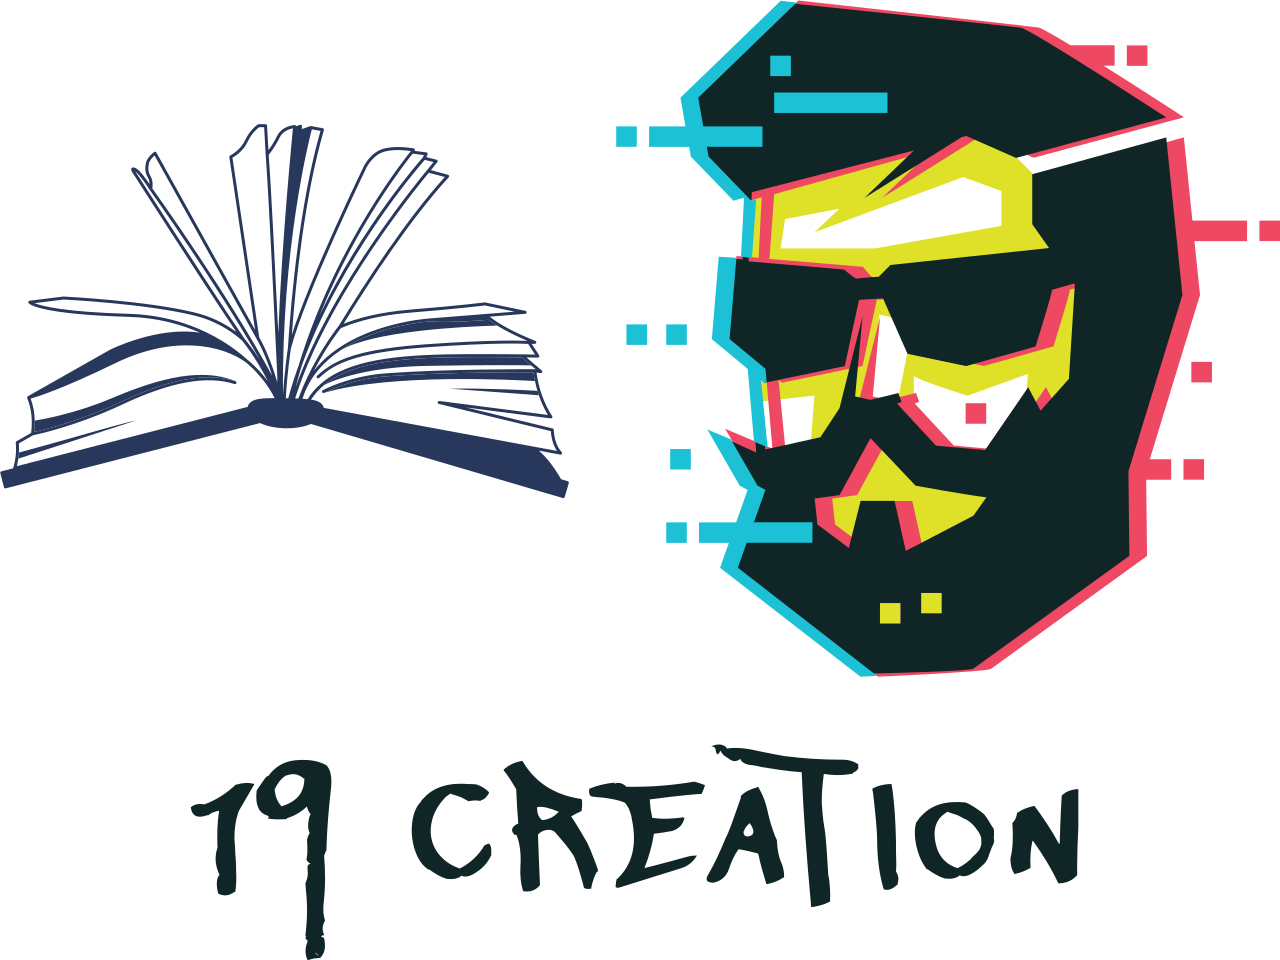 19 Creation's web page